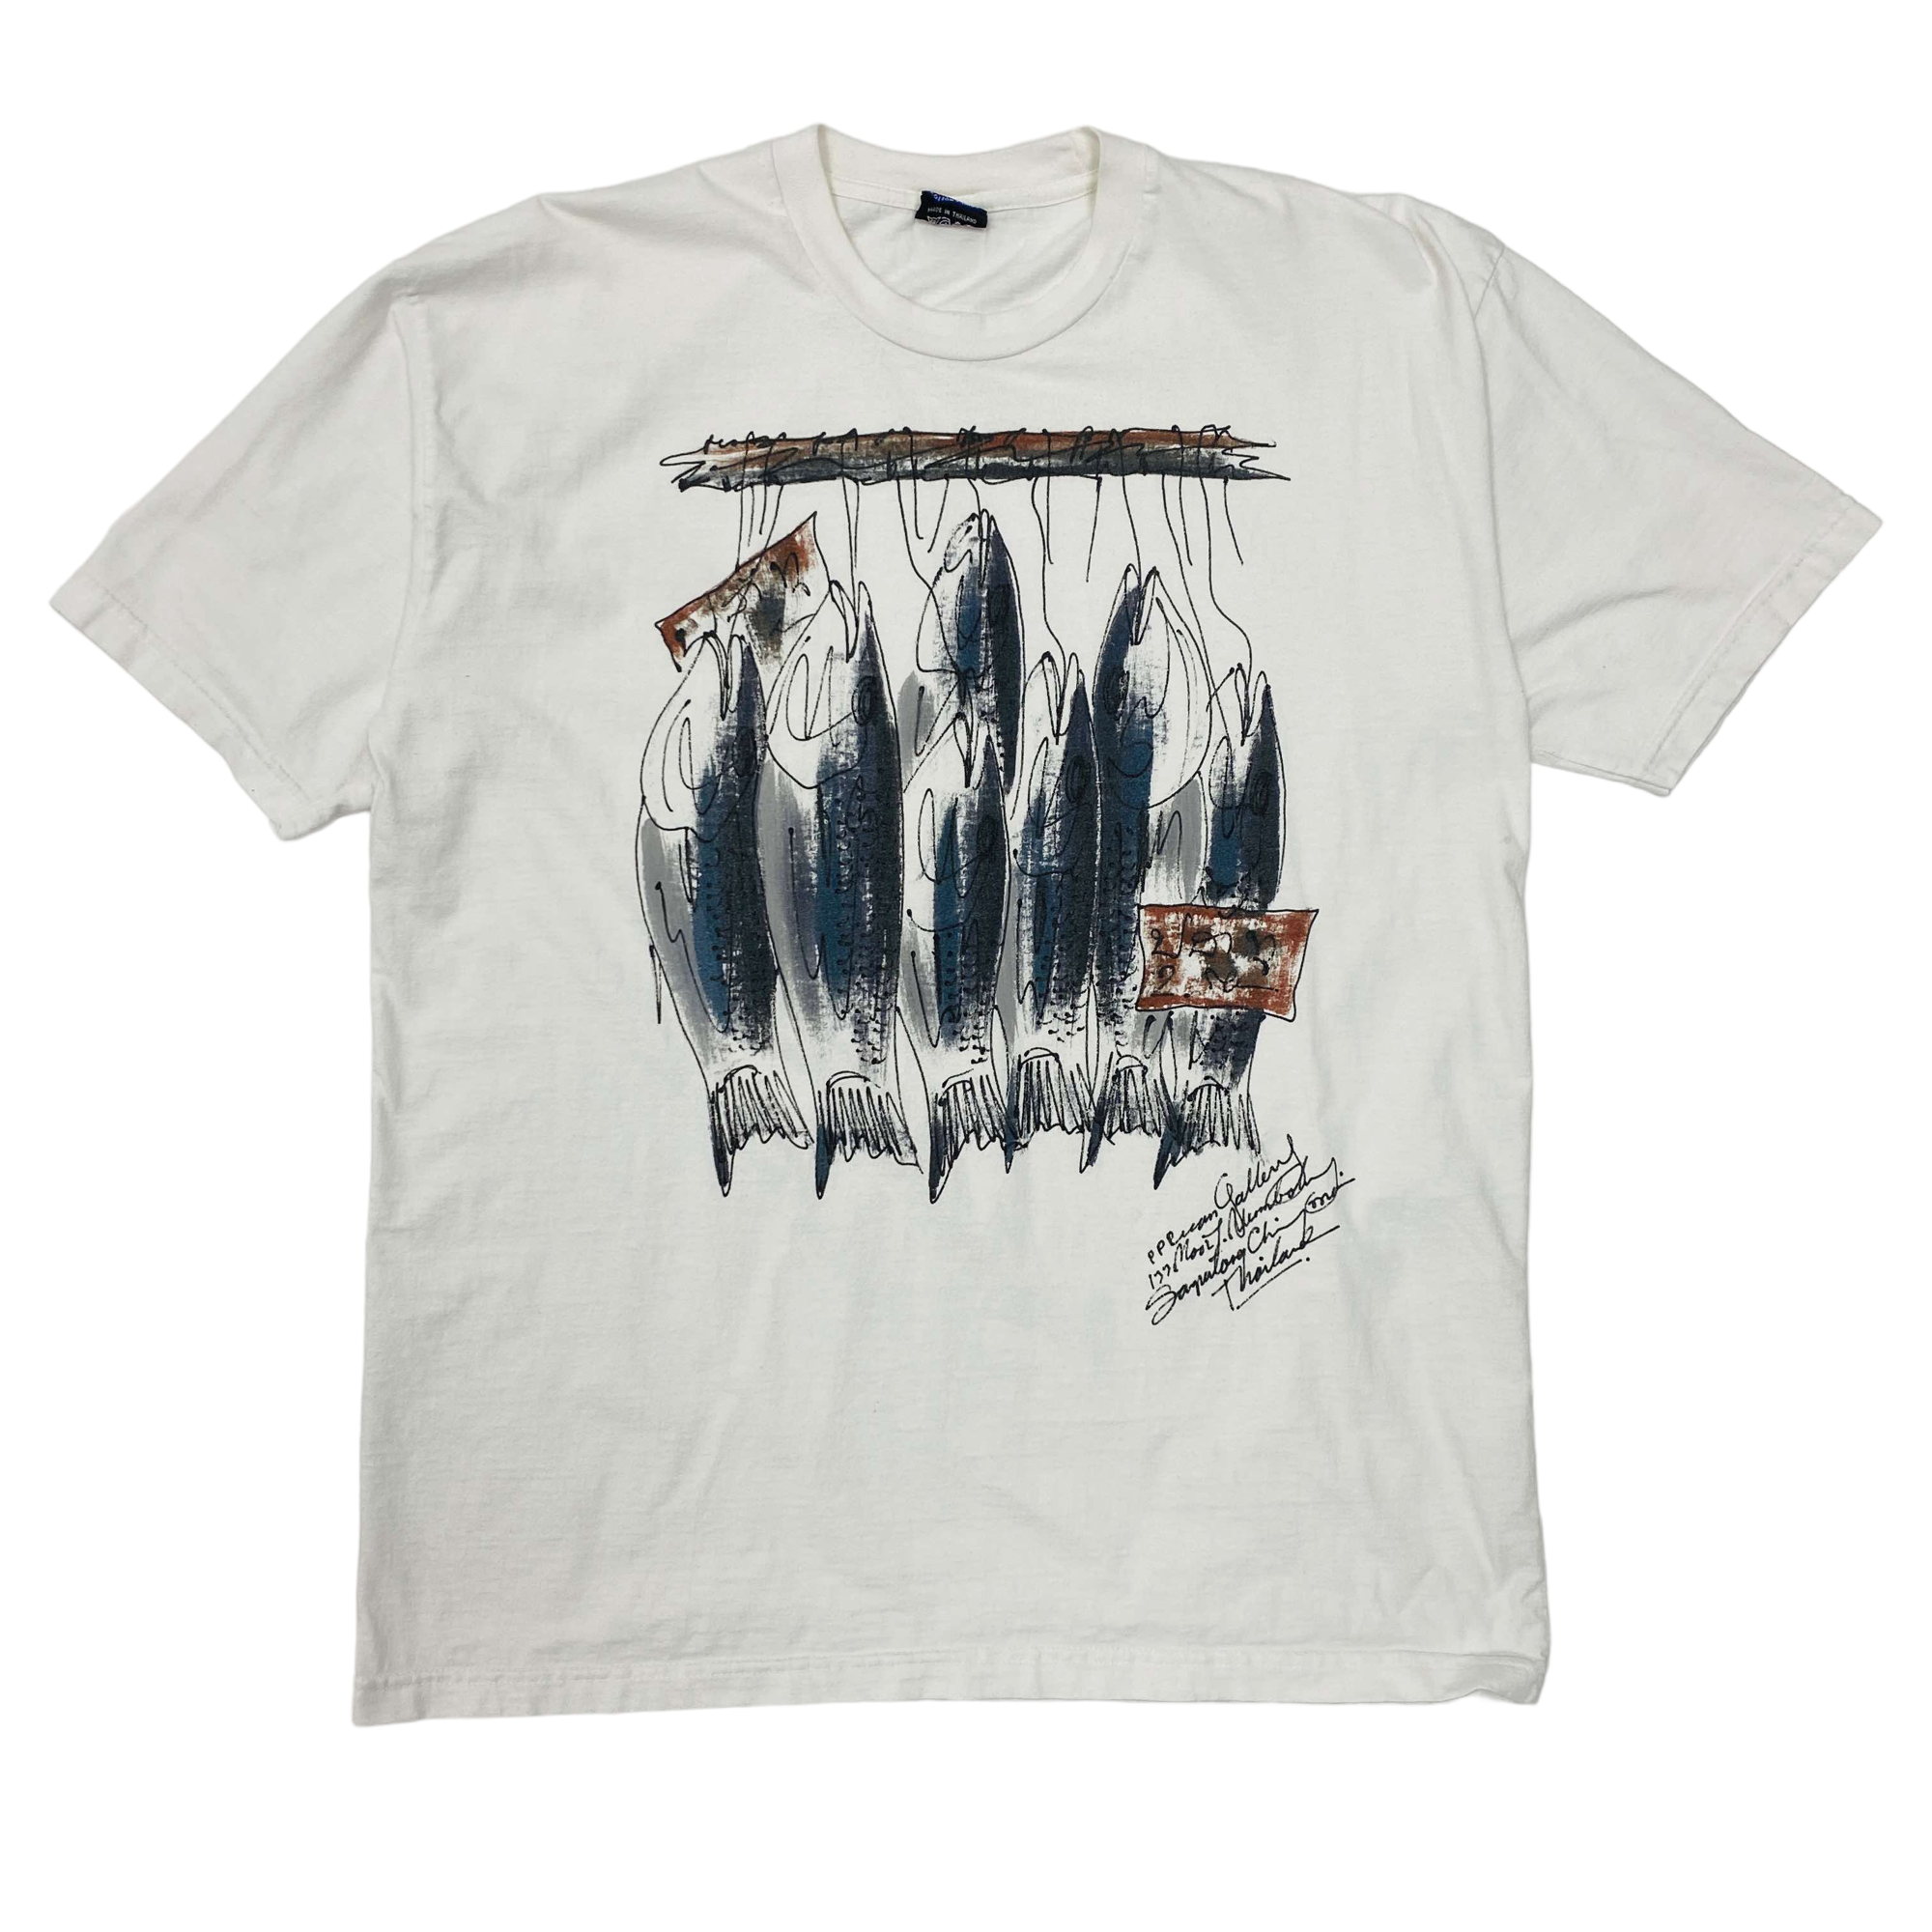 Hand Painted Fish Graphic T-Shirt - XL